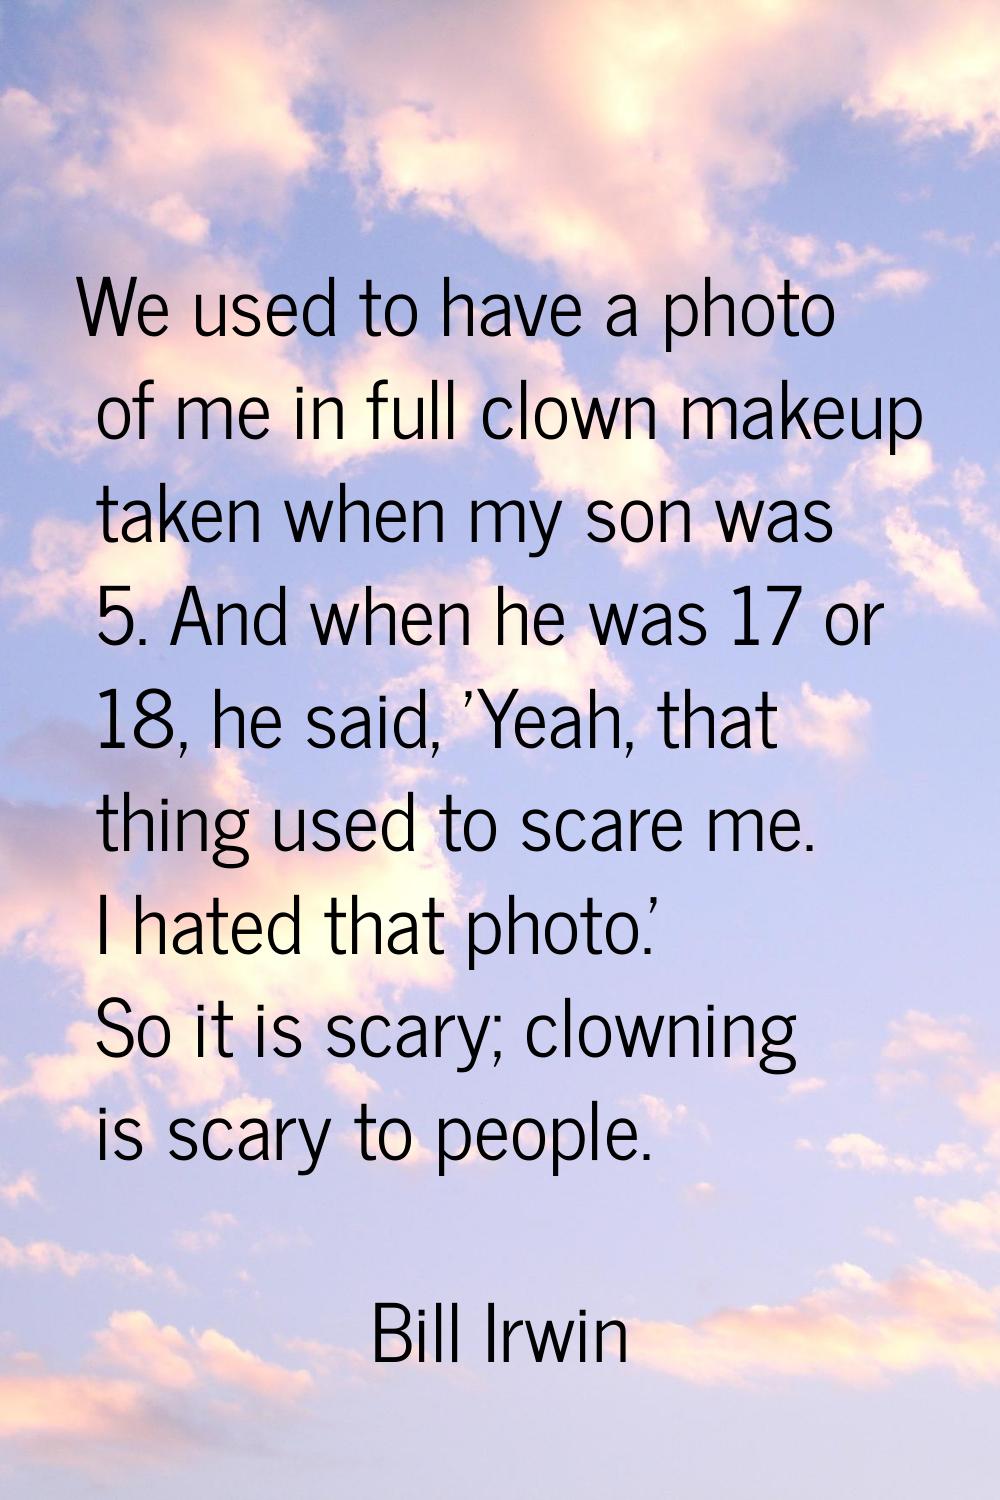 We used to have a photo of me in full clown makeup taken when my son was 5. And when he was 17 or 1